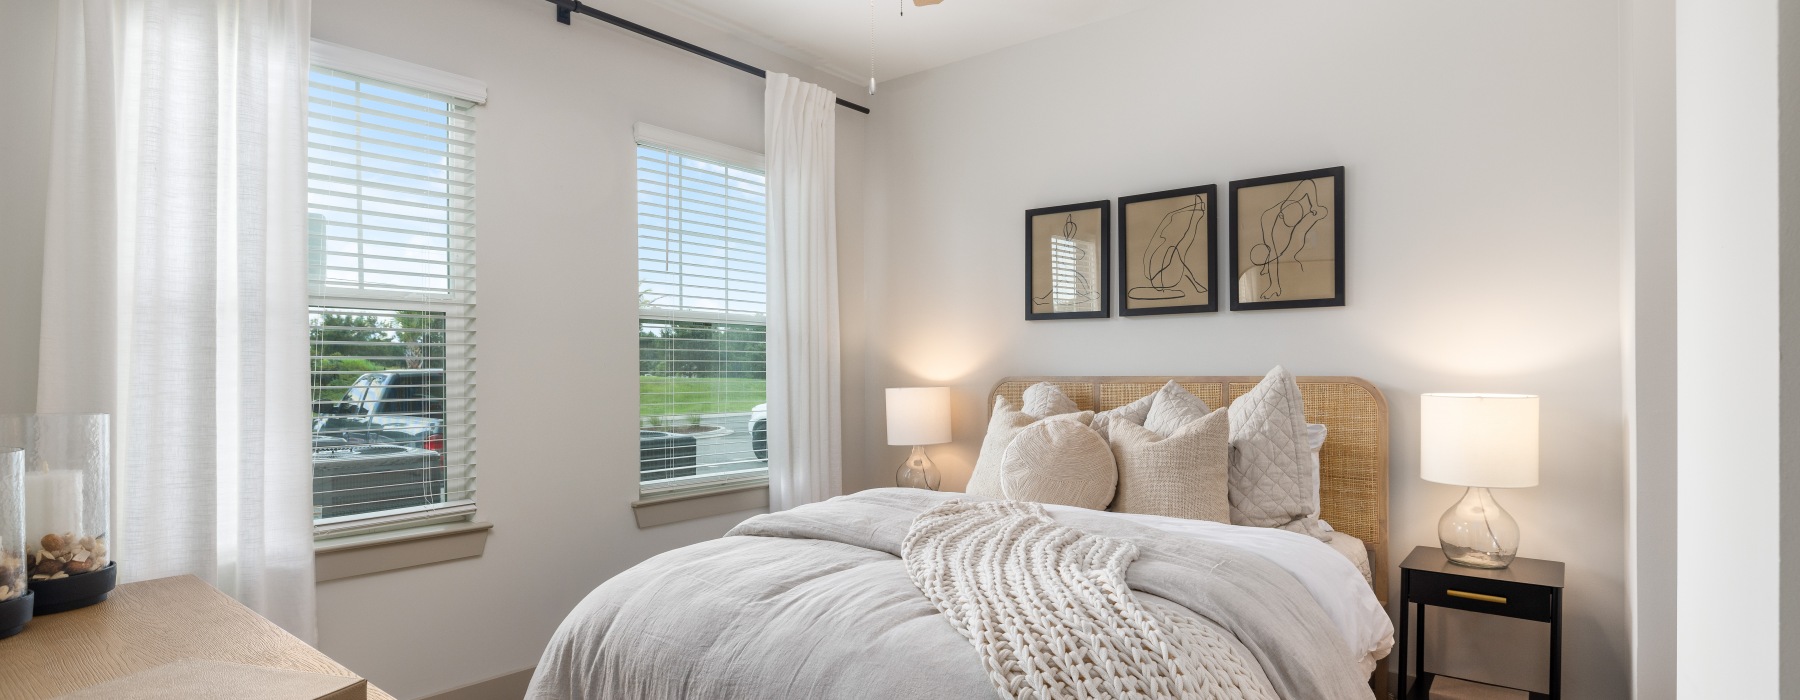 Large windows in apartment bedrooms at The Lively Murrells Inlet